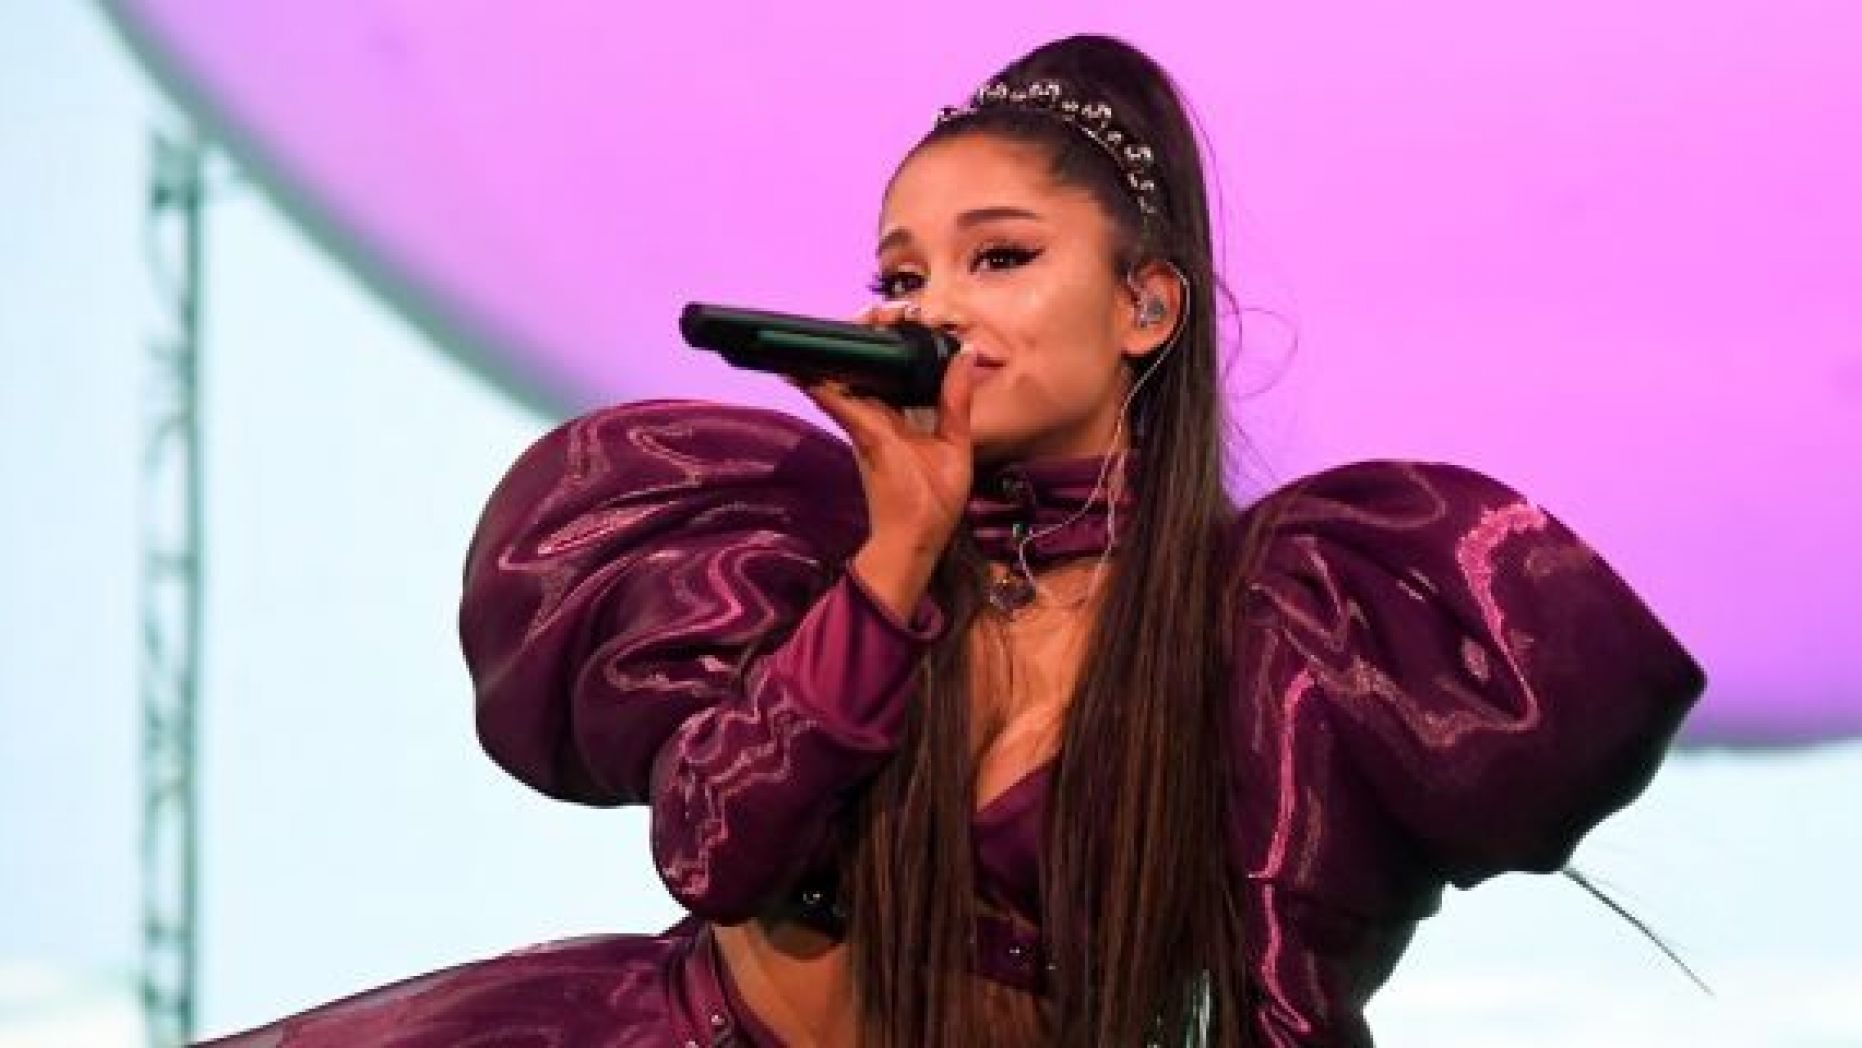 Pop star <a data-cke-saved-href="https://www.foxnews.com/category/person/ariana-grande" href="https://www.foxnews.com/category/person/ariana-grande" target="_blank">Ariana Grande</a> donated $250,000 of proceeds to Planned Parenthood after her Saturday concert in<a data-cke-saved-href="https://www.foxnews.com/category/us/us-regions/southeast/georgia" href="https://www.foxnews.com/category/us/us-regions/southeast/georgia" target="_blank"> Atlanta, Georgia,</a> according to the group.